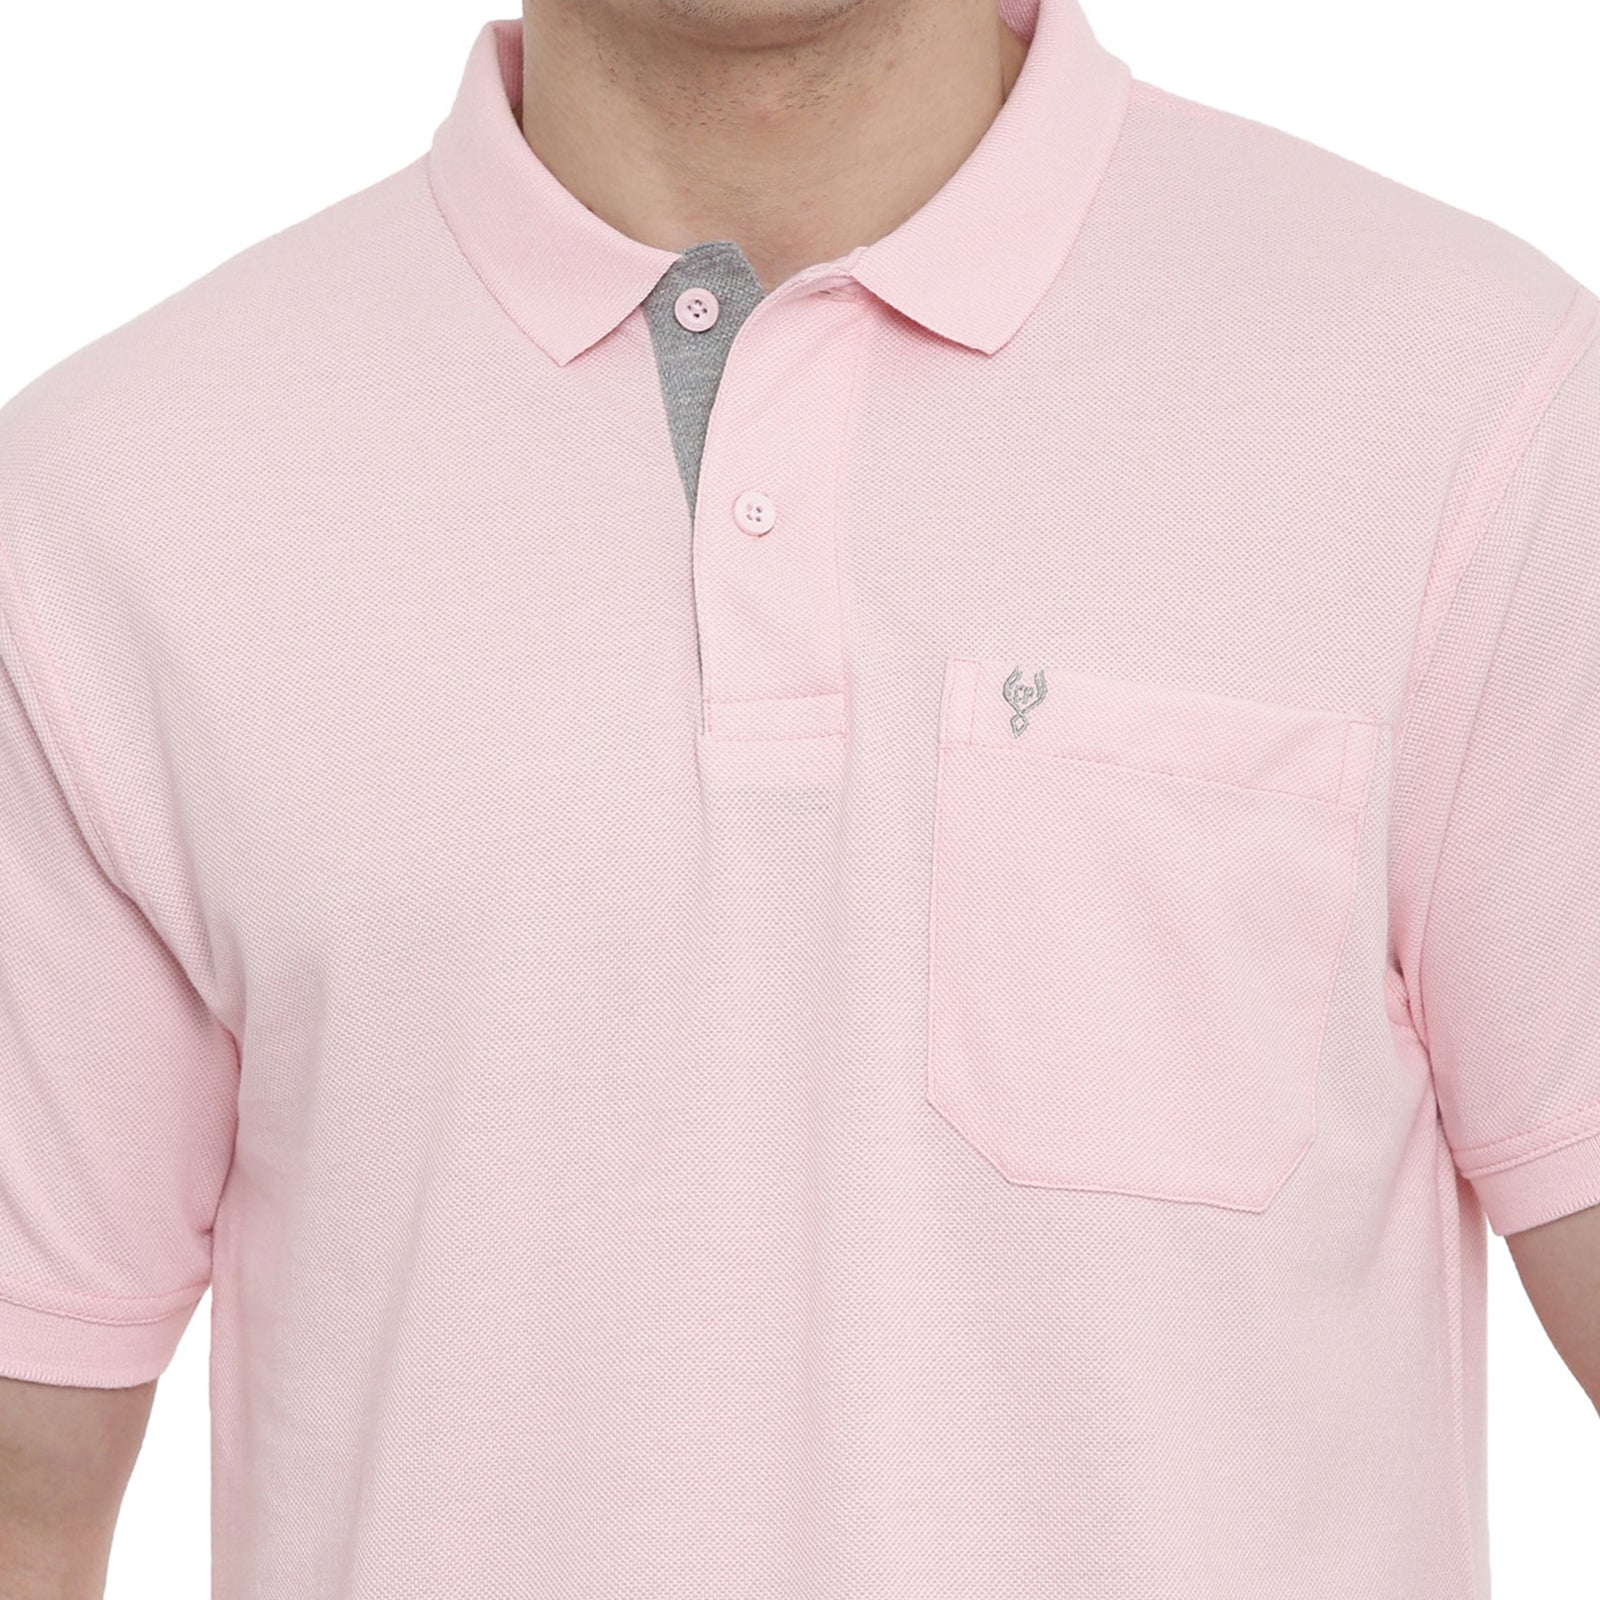 Men's Pink Polo Authentic Fit T-Shirt - 4SSN 216 T-shirt Classic Polo 